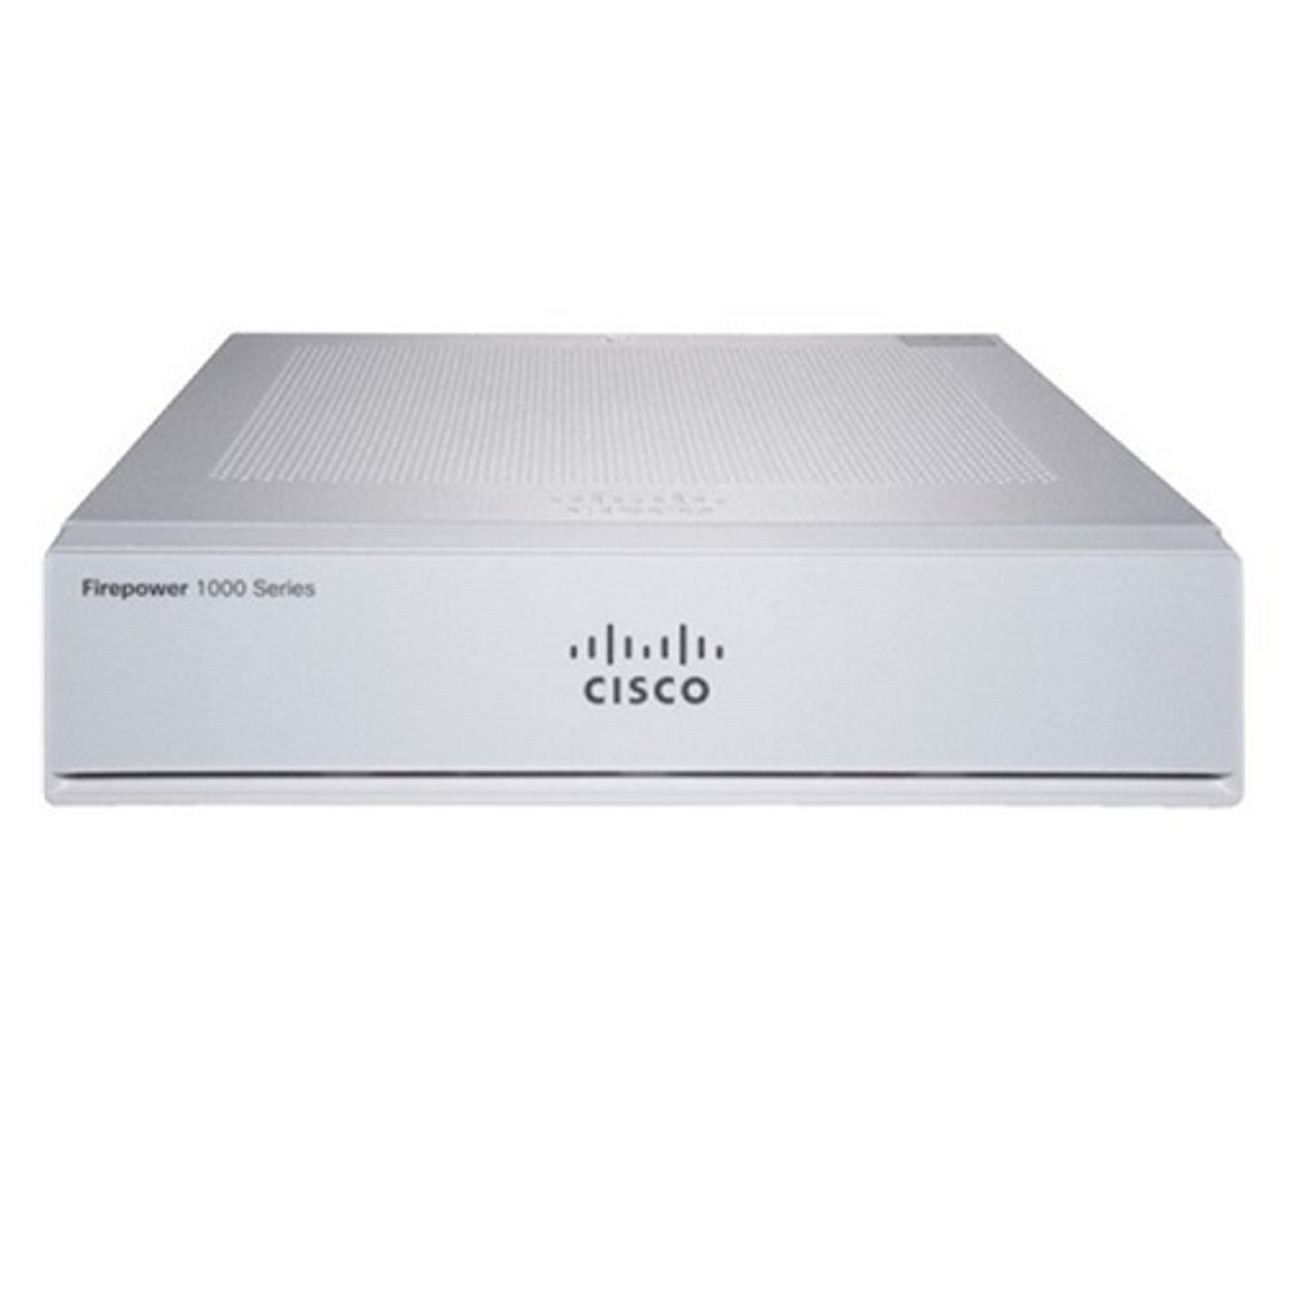 Cisco Firepower 1010 Two Unit High Availability Bundle (will order 2 identical chassis and software subscriptions)